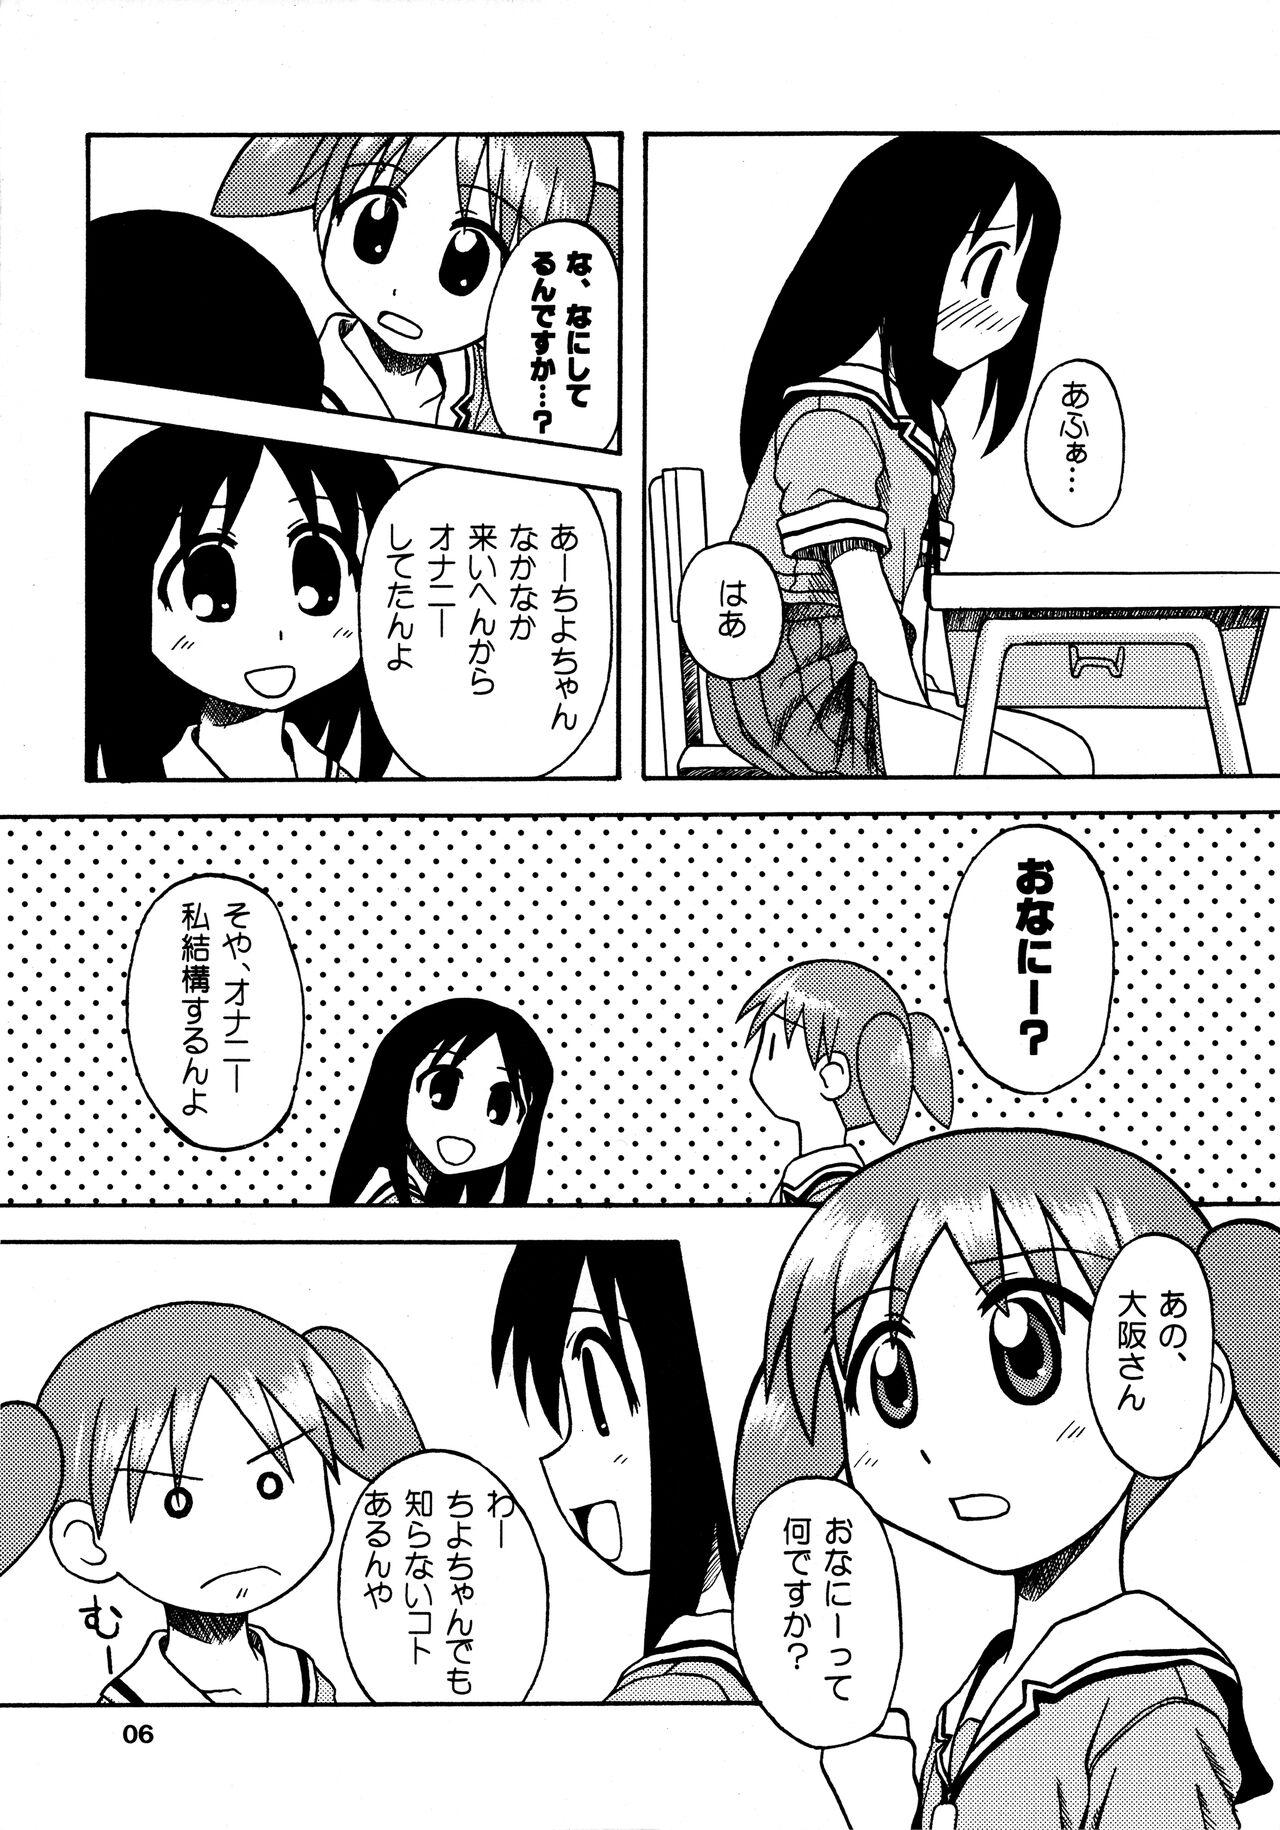 Naked ANOTHER LIFE - Azumanga daioh Perfect Body Porn - Page 6